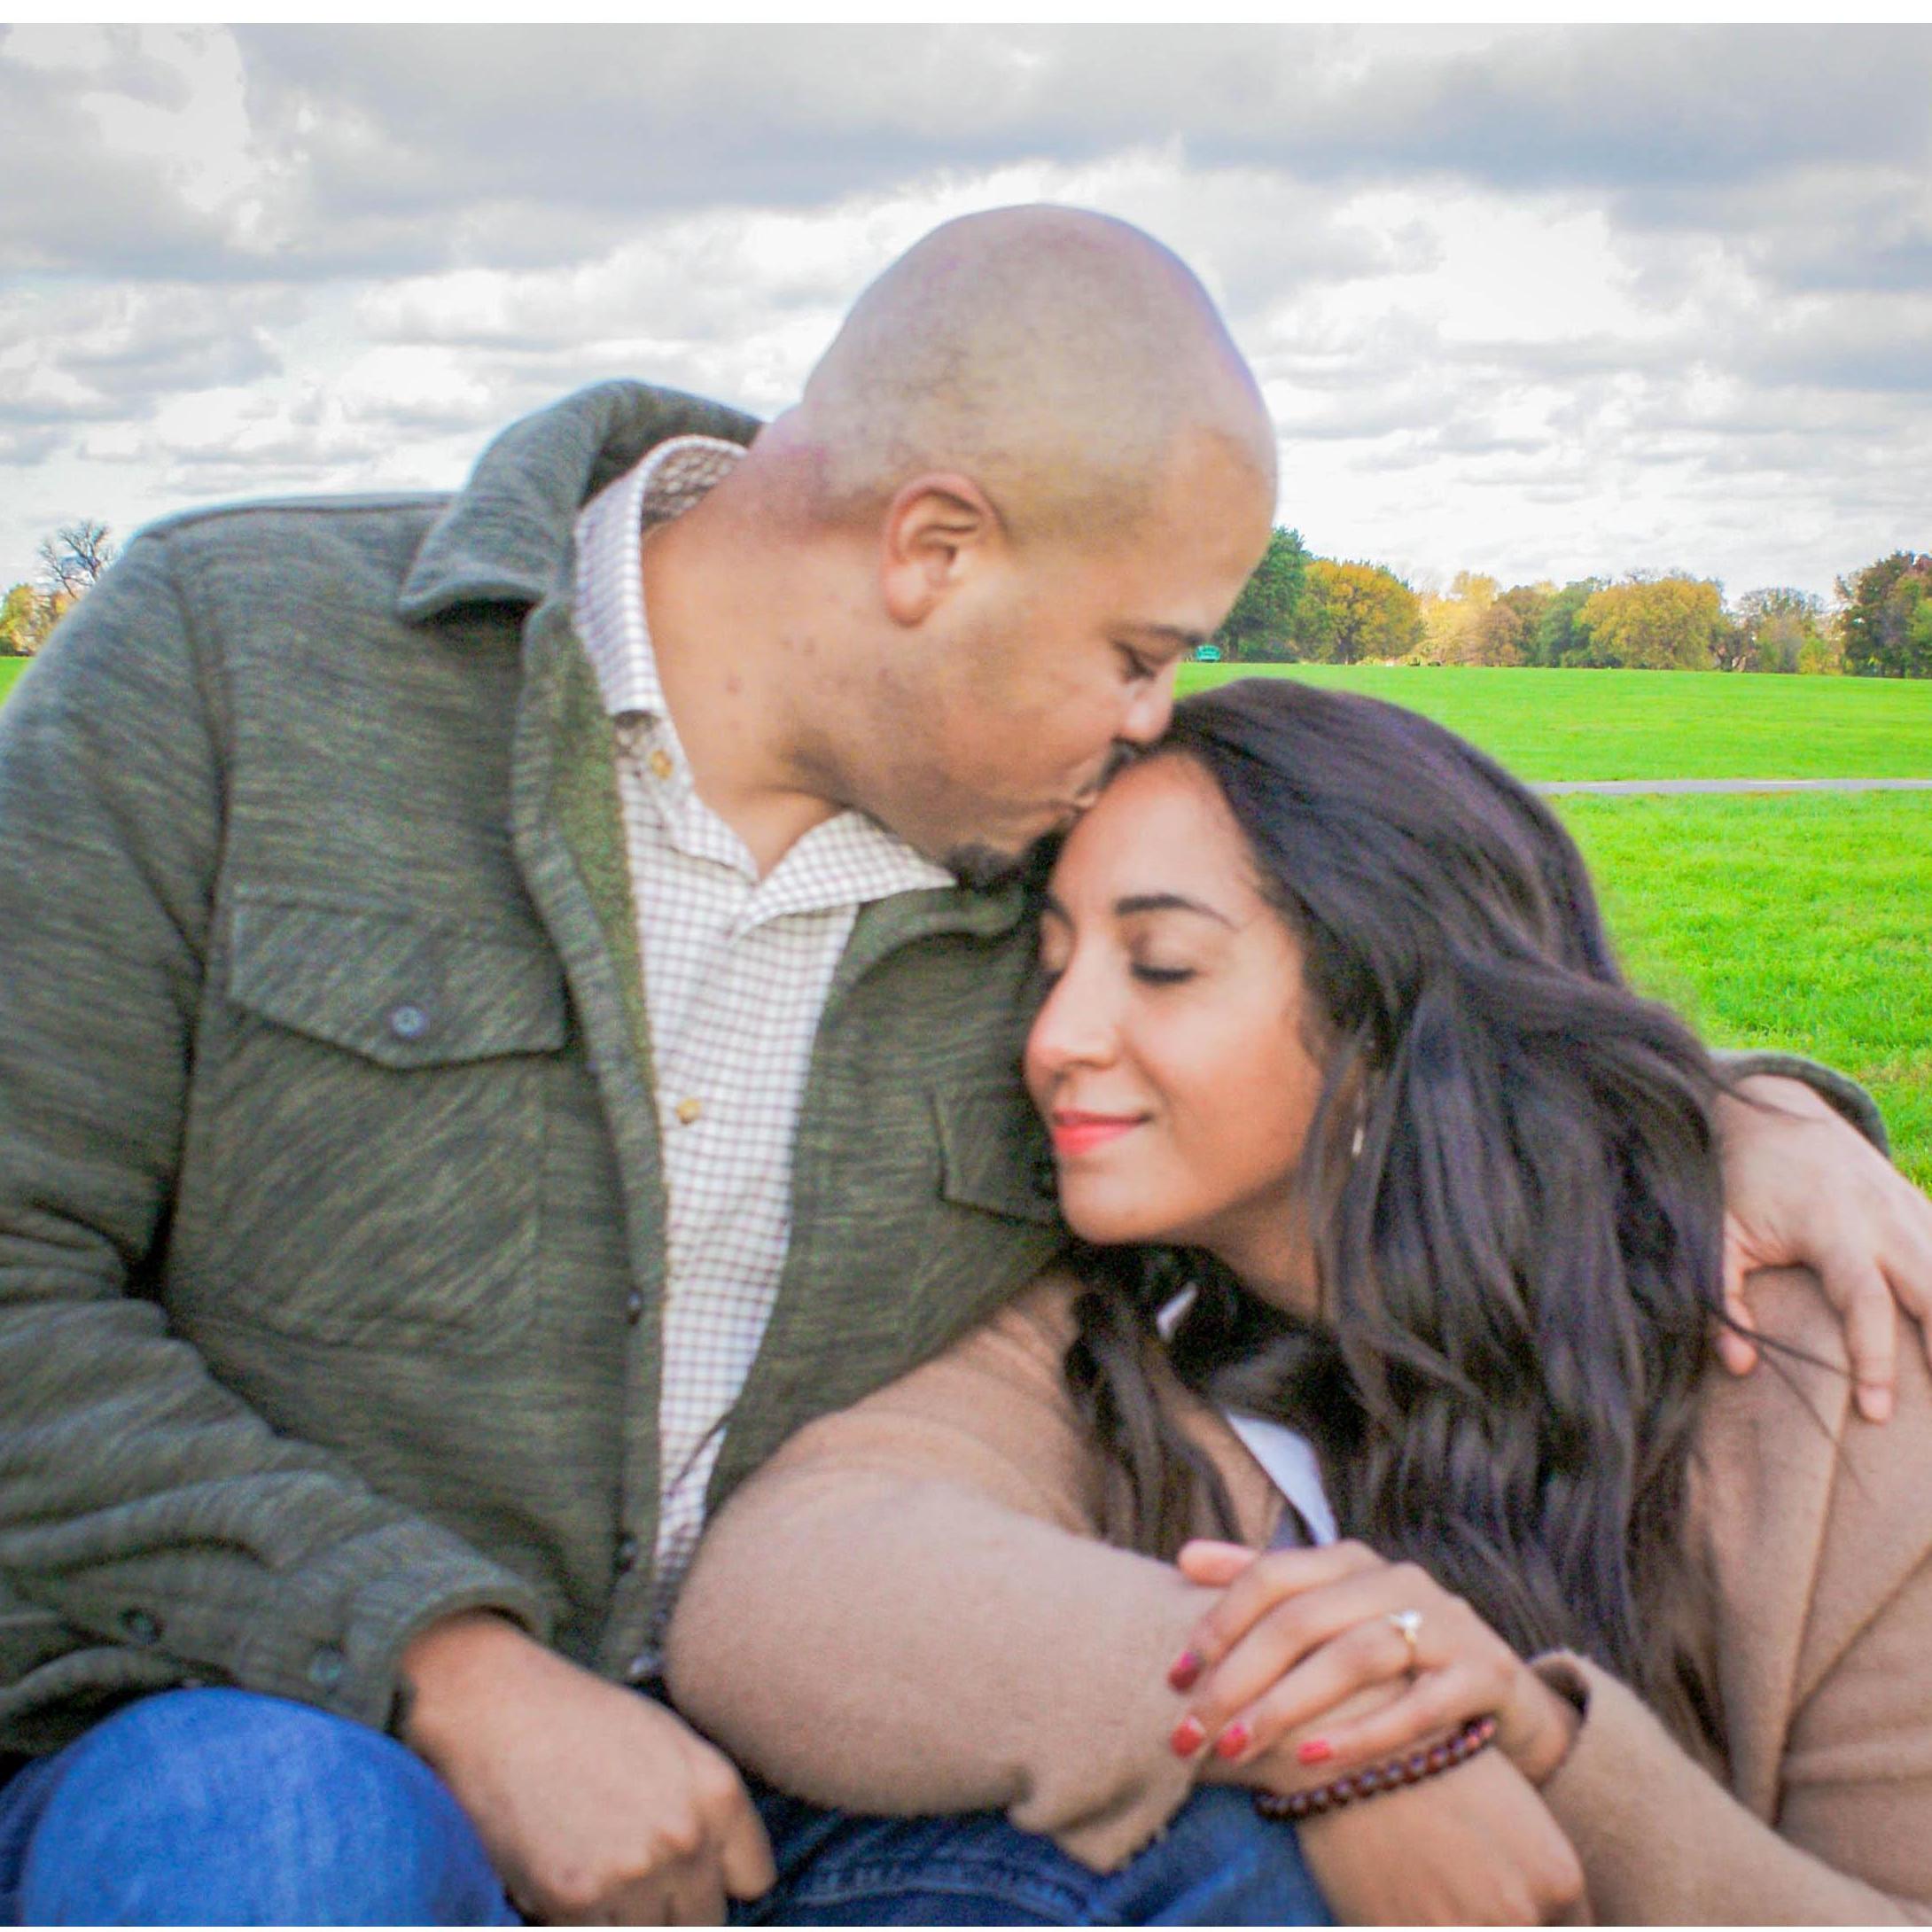 Our engagement shoot at Gravelly Point in Washington DC